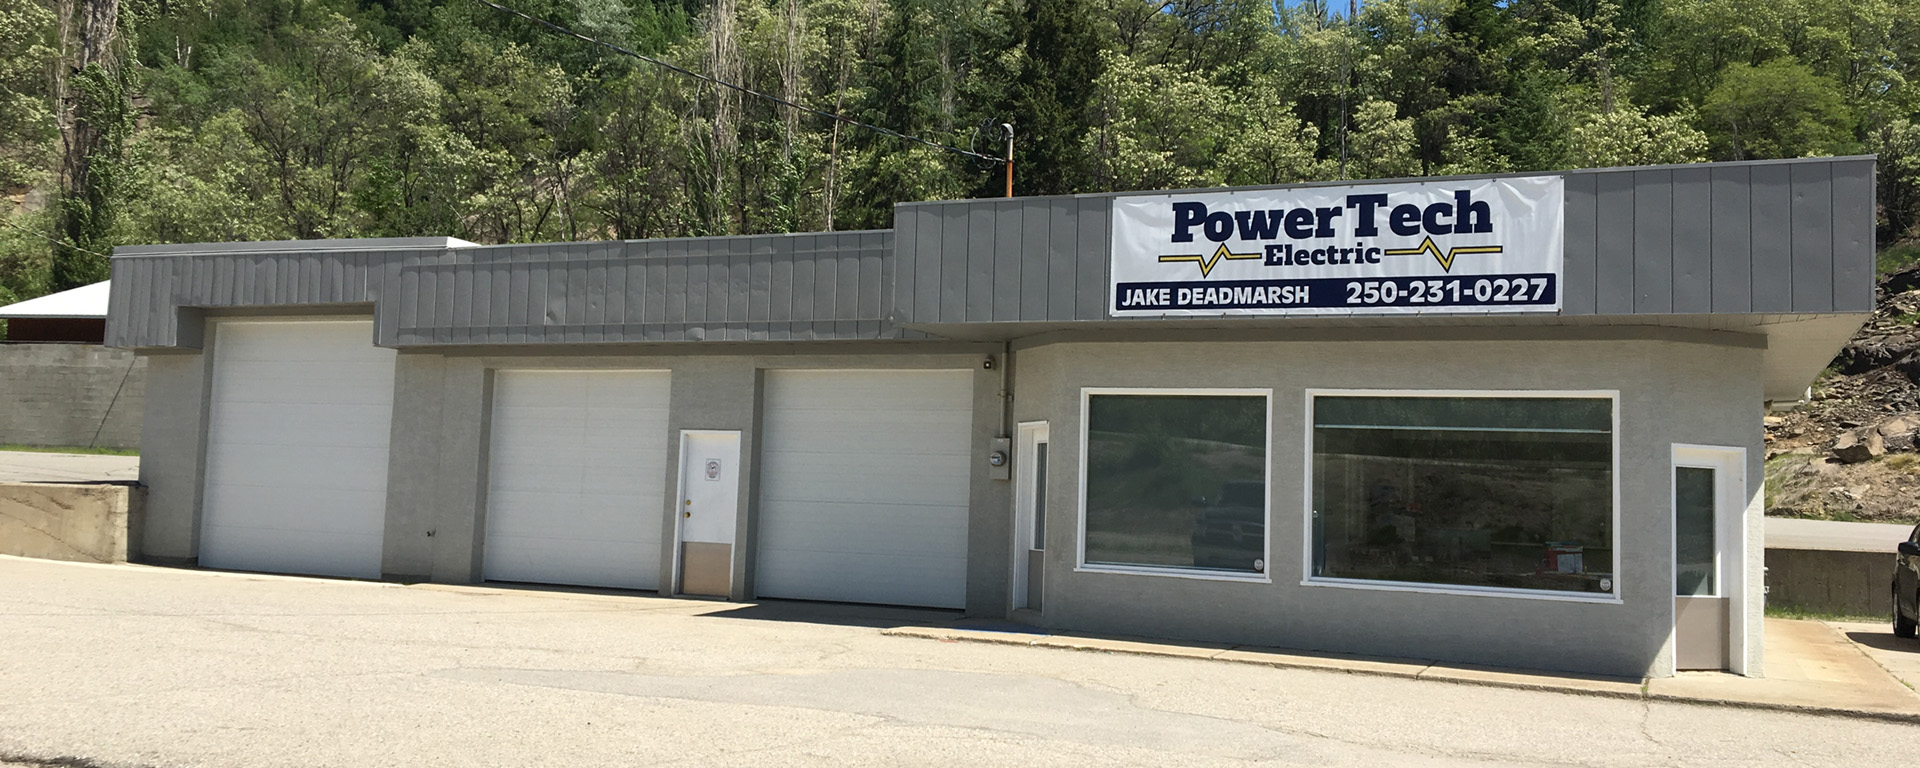 Power Tech Electric building in Trail, BC. 